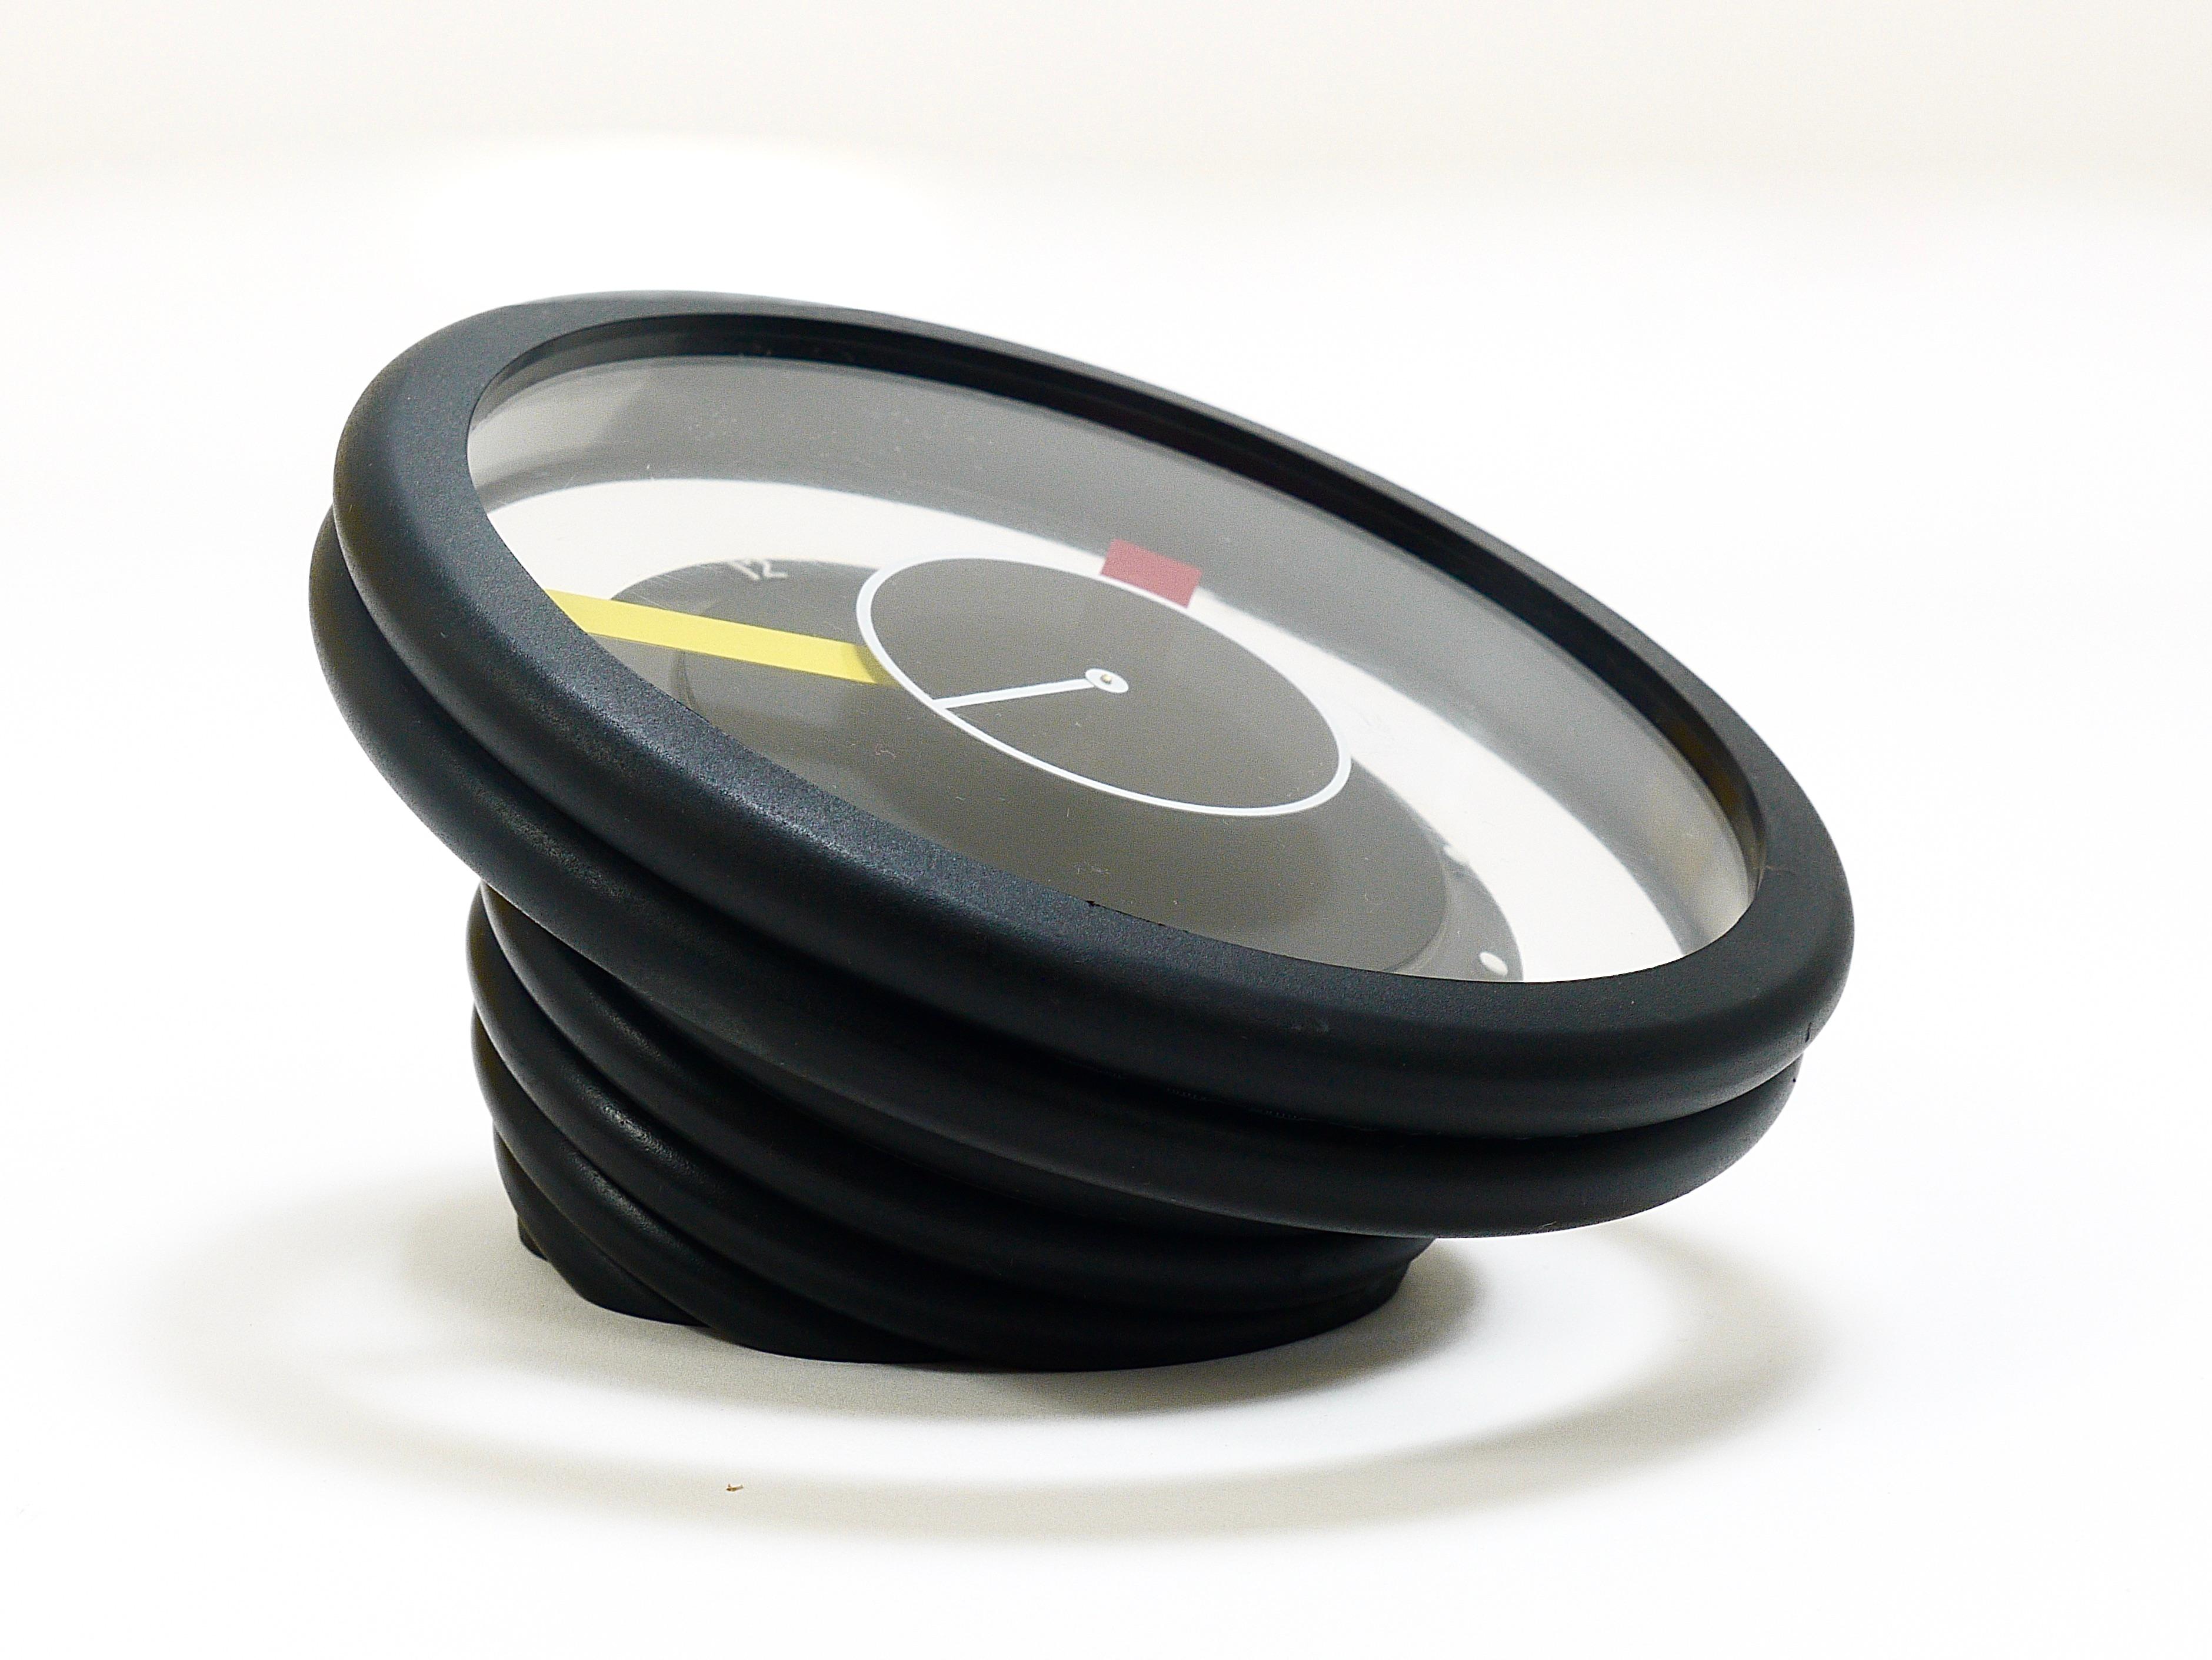 Postmodern Round Pop Art Desk or Table Clock, Memphis Milano Style, Italy, 1990s For Sale 6